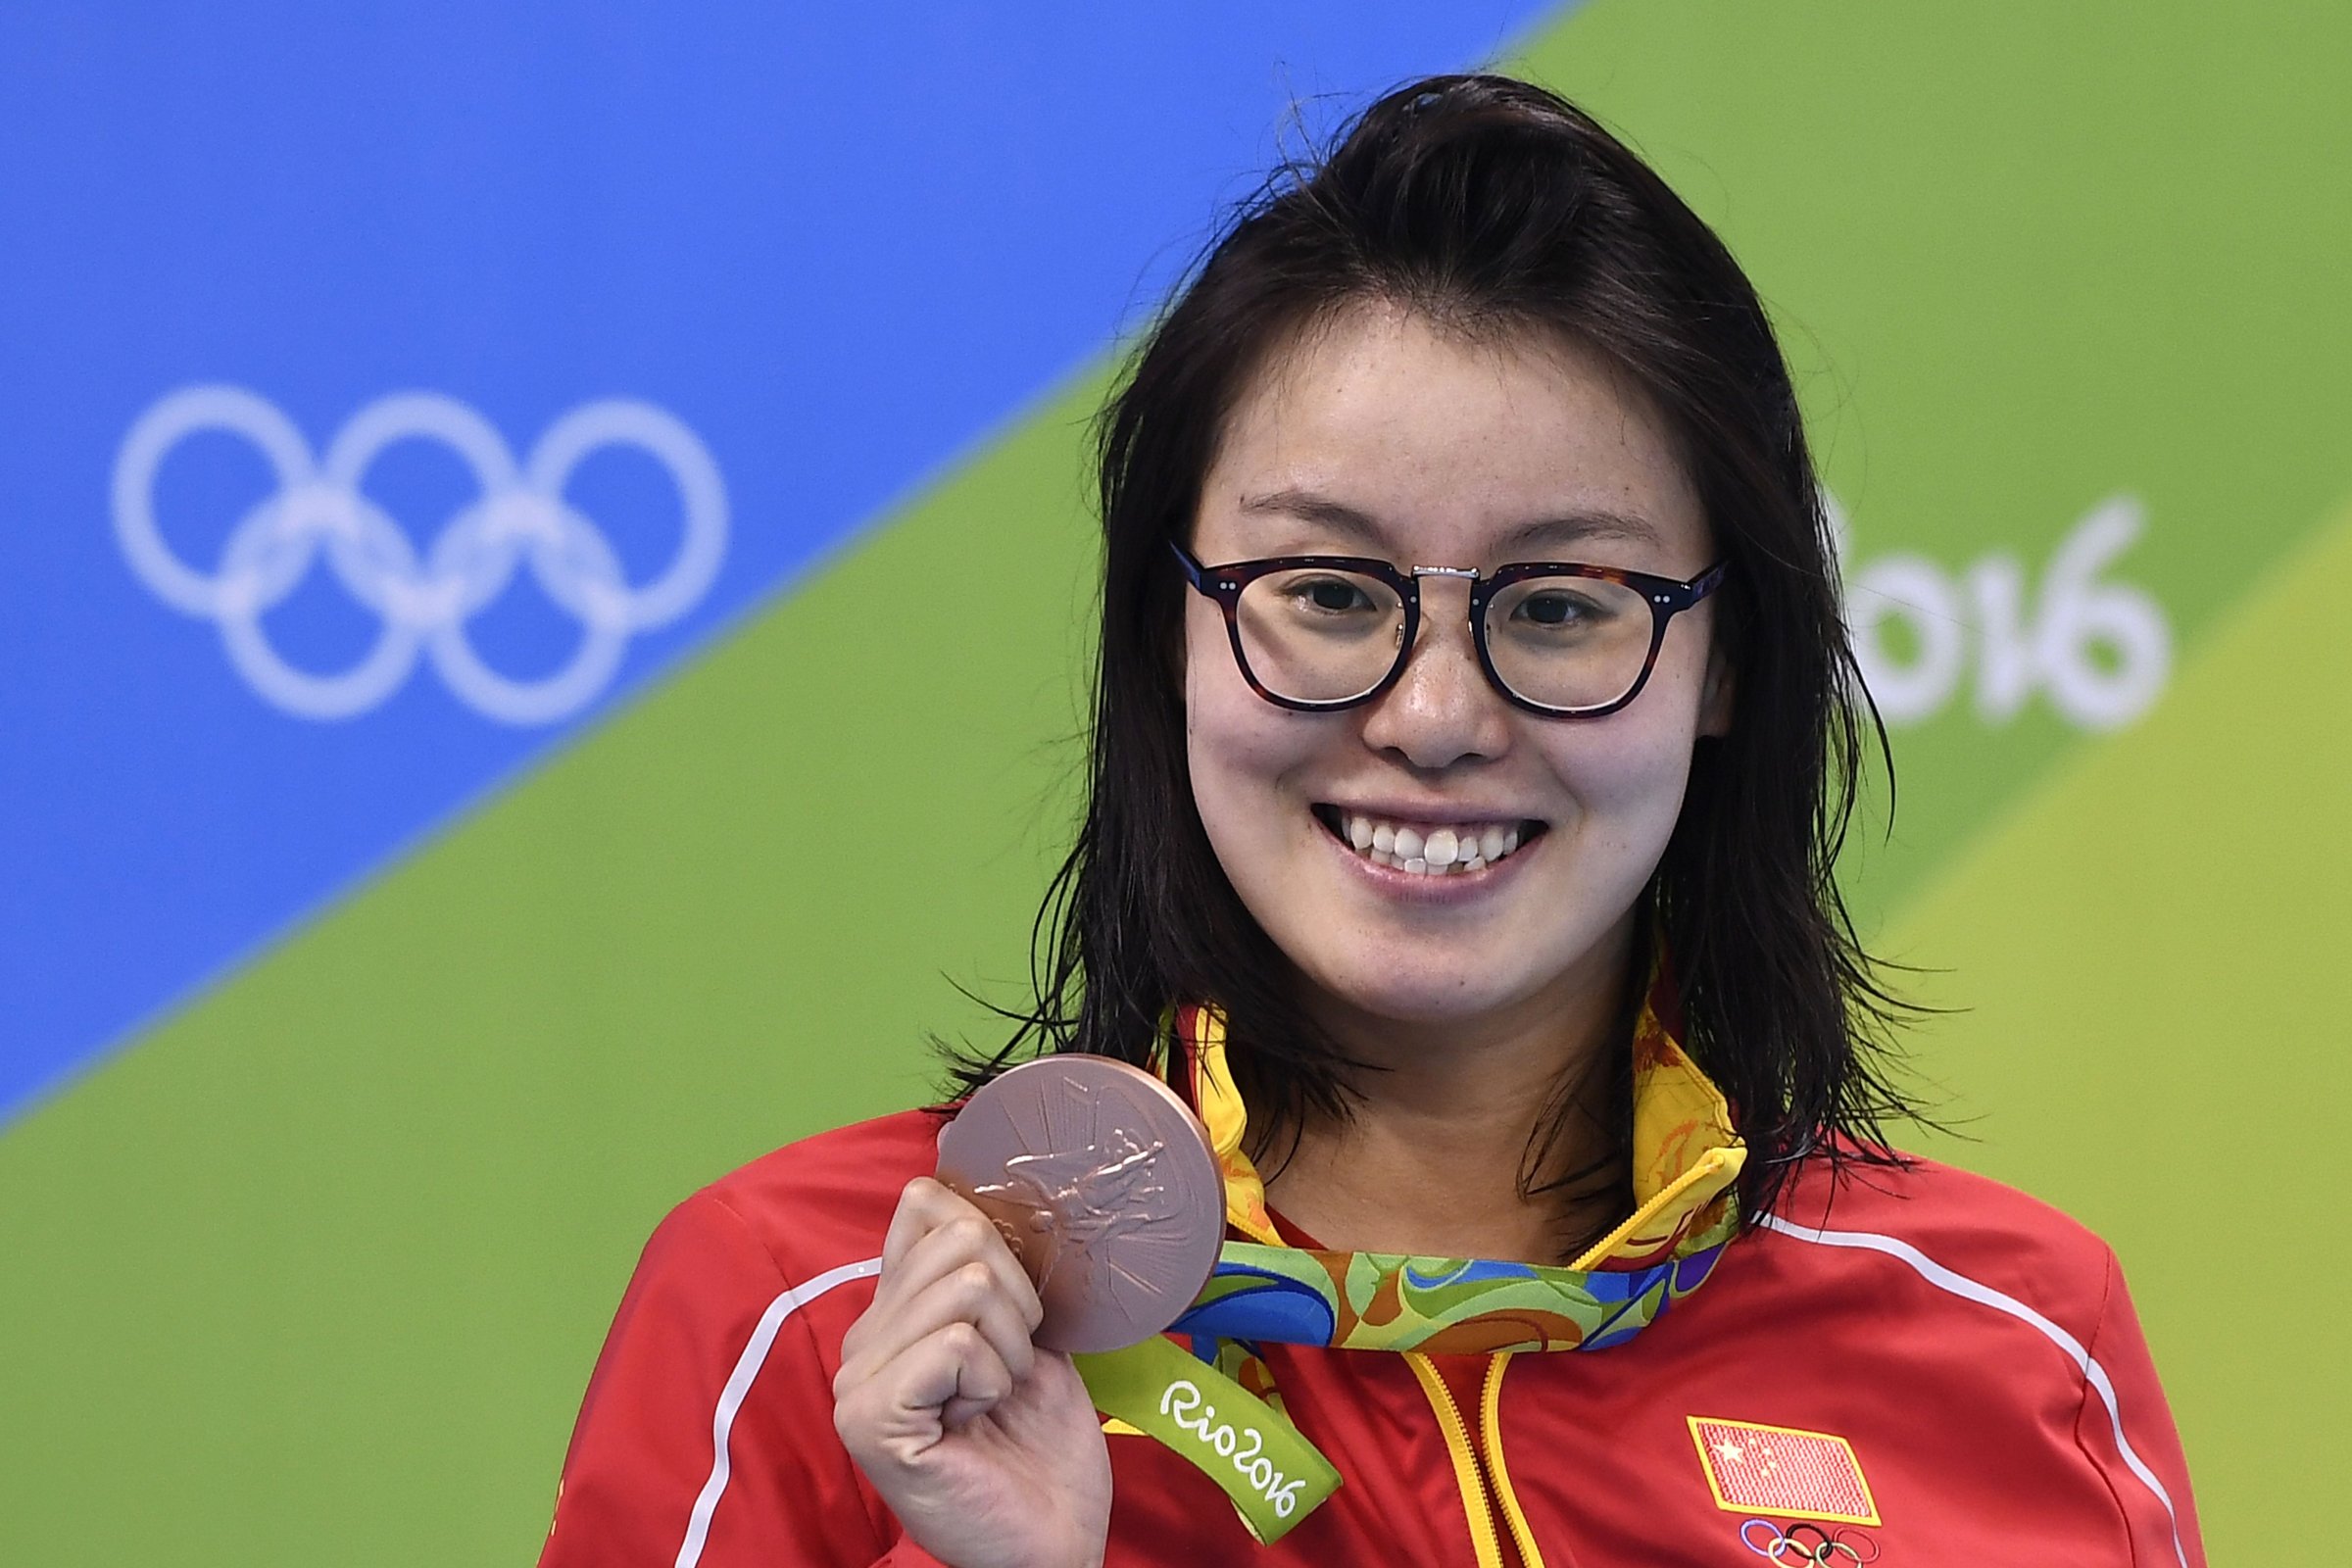 China's Fu Yuanhui poses with her bronze medal on the podium of the Women's 100m Backstroke during the swimming event at the Rio 2016 Olympic Games at the Olympic Aquatics Stadium in Rio de Janeiro on August 8, 2016.